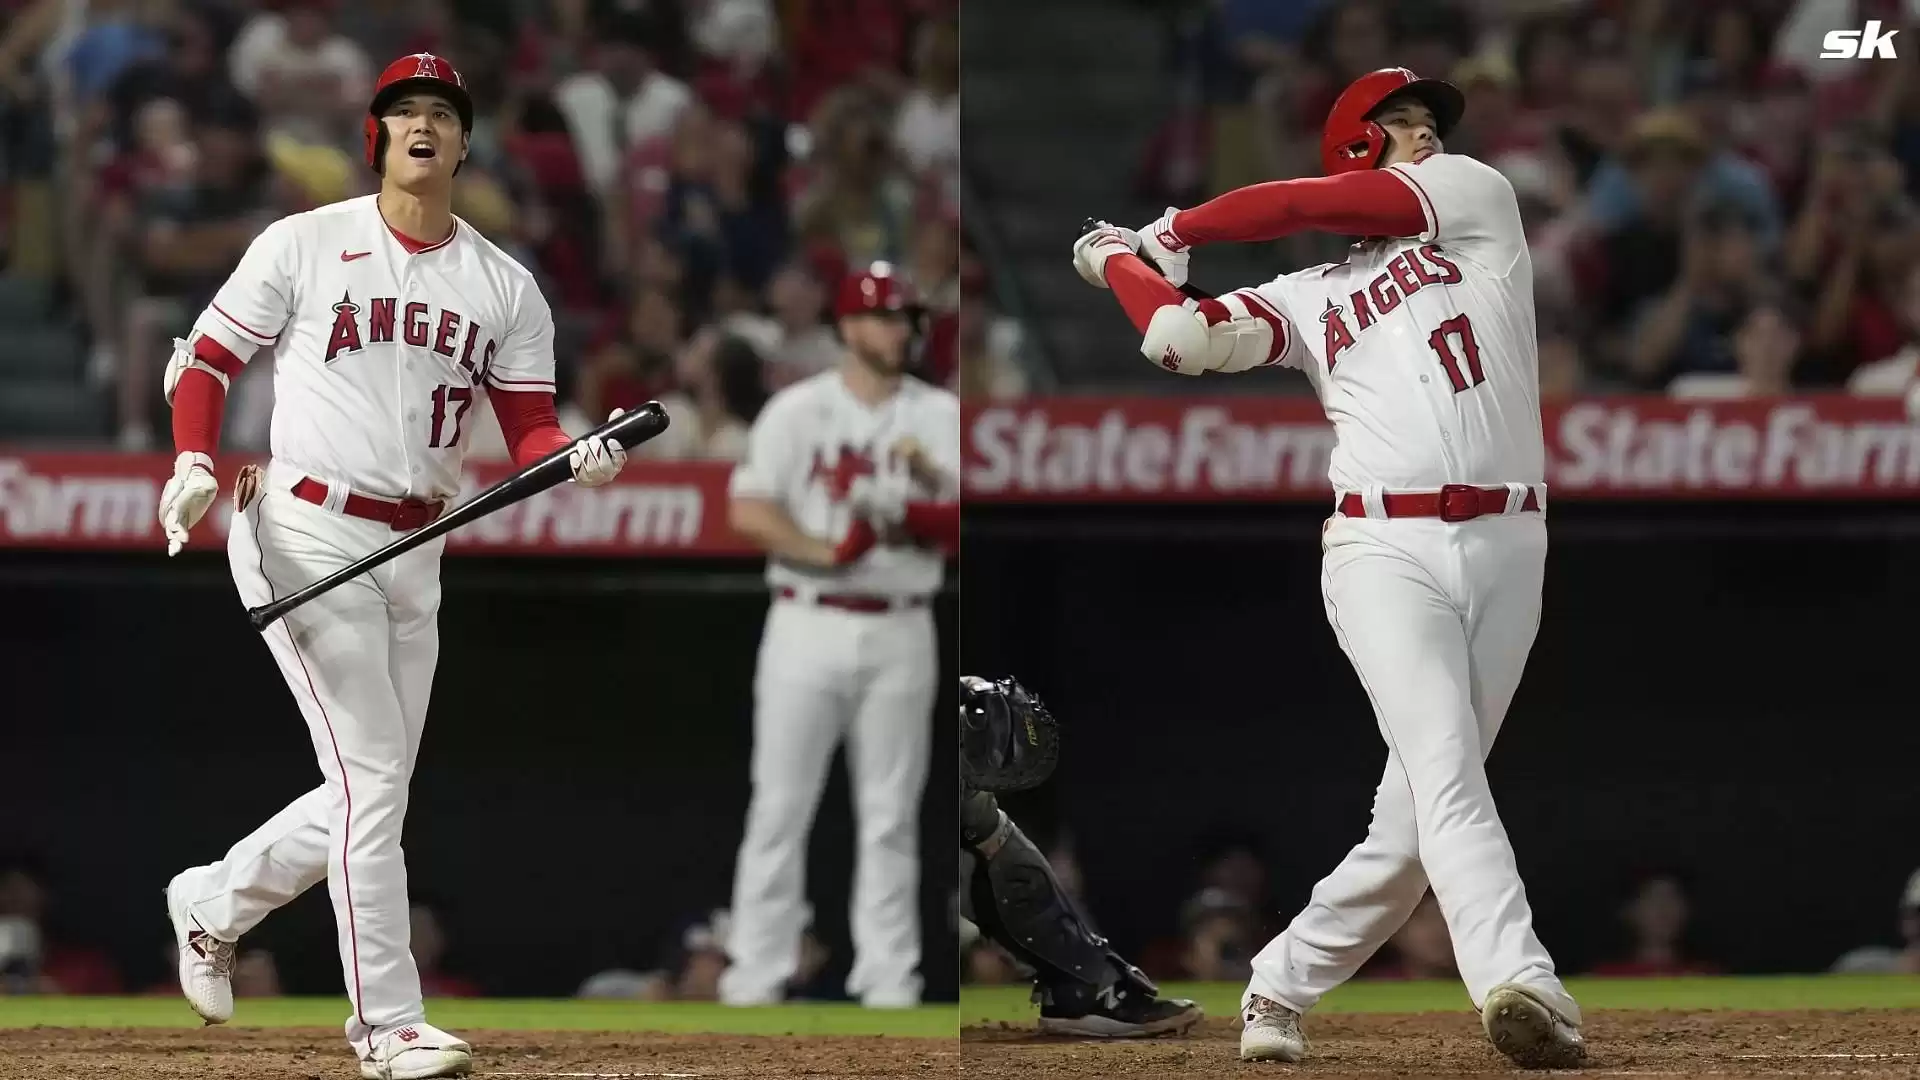 MLB Fans Slam Shohei Ohtani as Angels Star Blows Chance to Tie Game vs Mariners